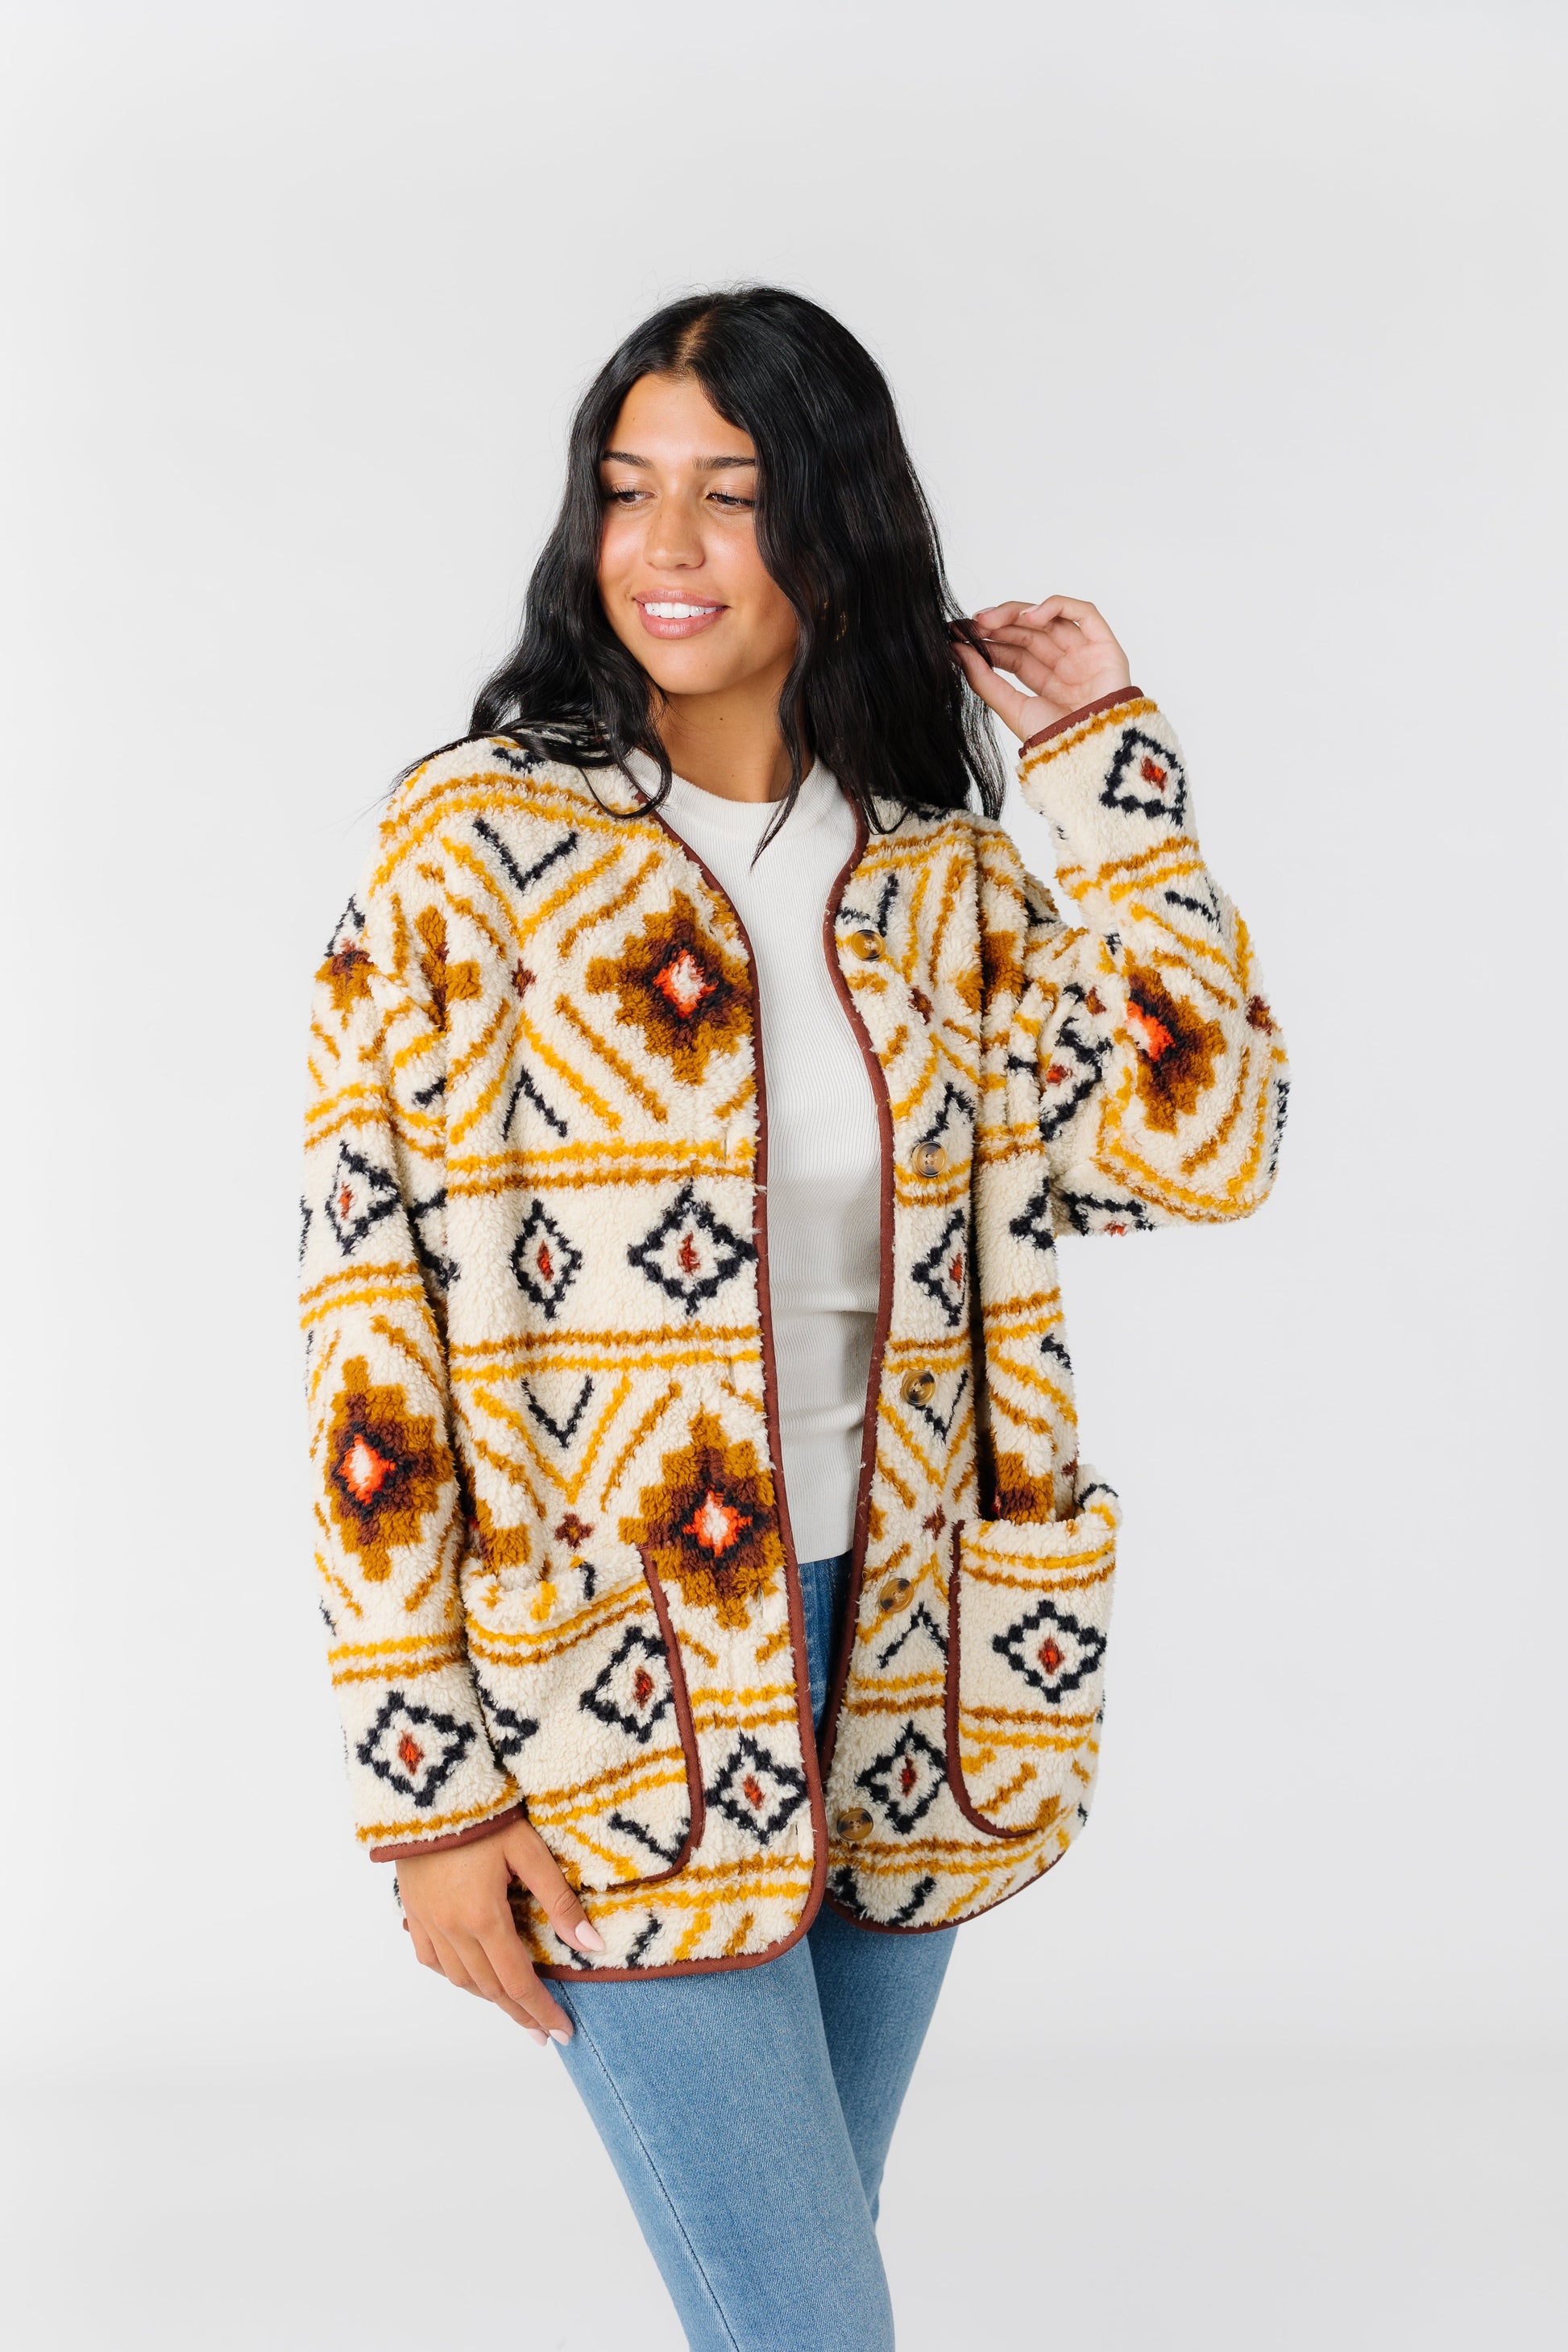 Cozy Billabong to Jacket Called Fireside Surf – Button Up